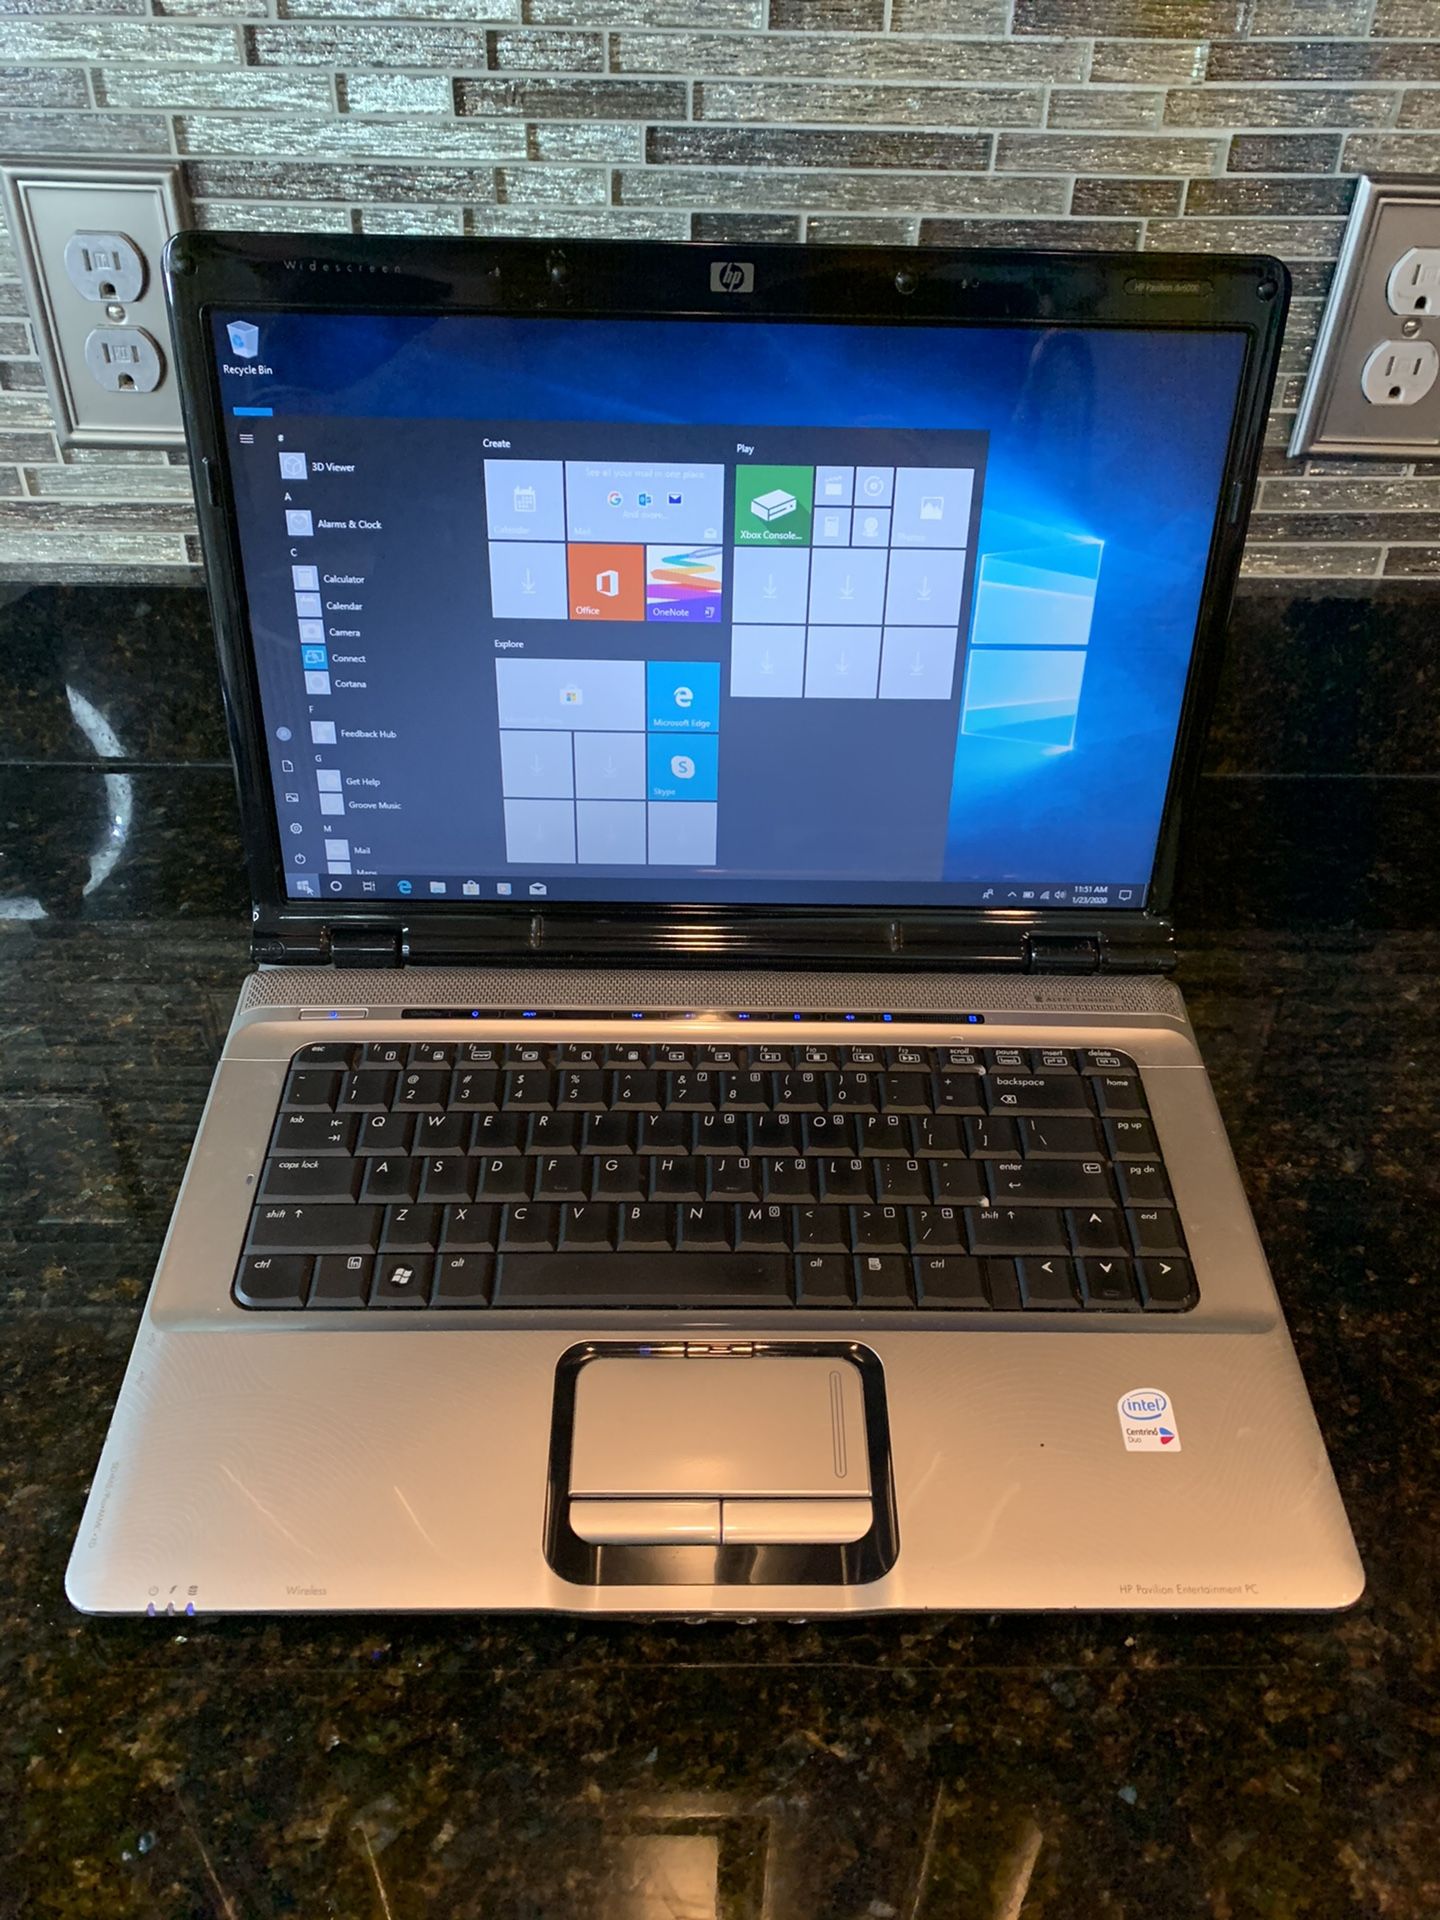 15.4 “ HP Pavilion dv6000 Laptop with Webcam, Windows 10 and Microsoft Office.